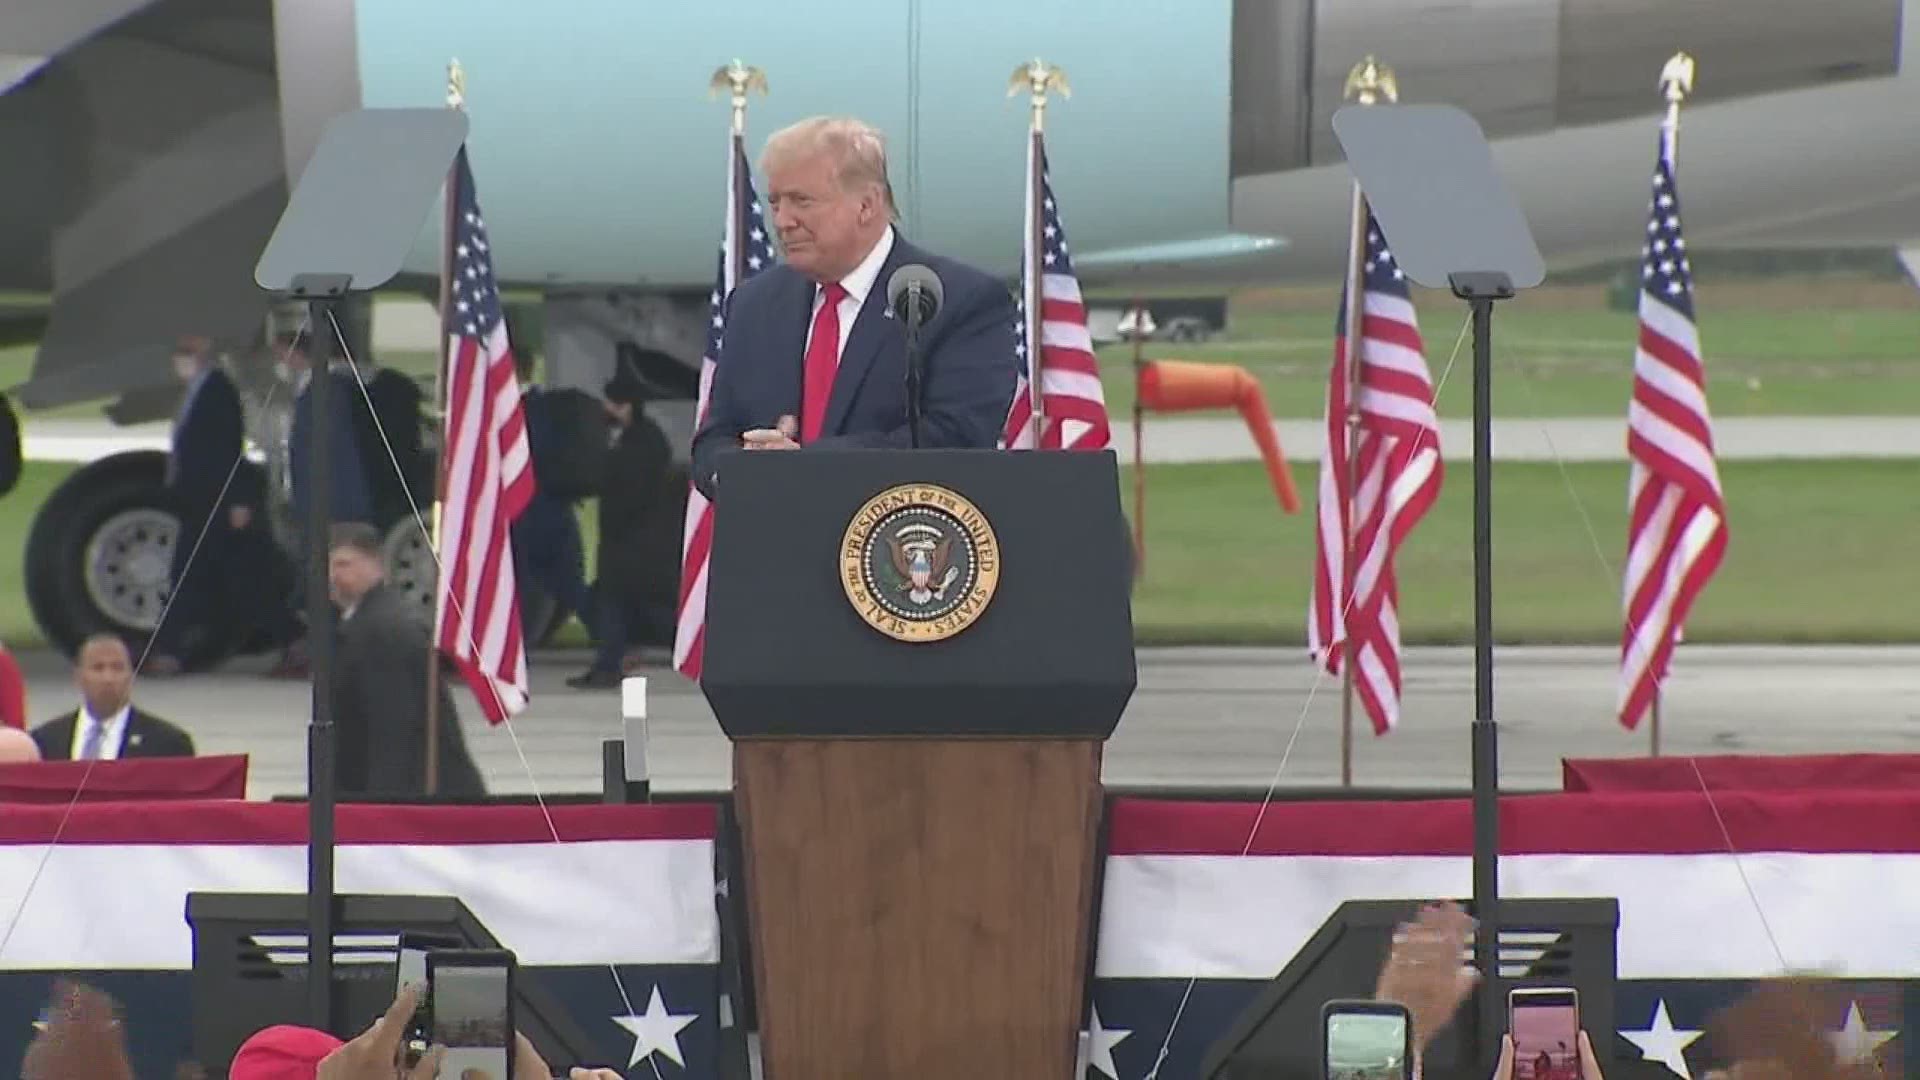 After stepping down from Air Force One, Trump reveled in the crowd of several thousand, packed shoulder-to-shoulder in an airport hangar, mostly without masks.